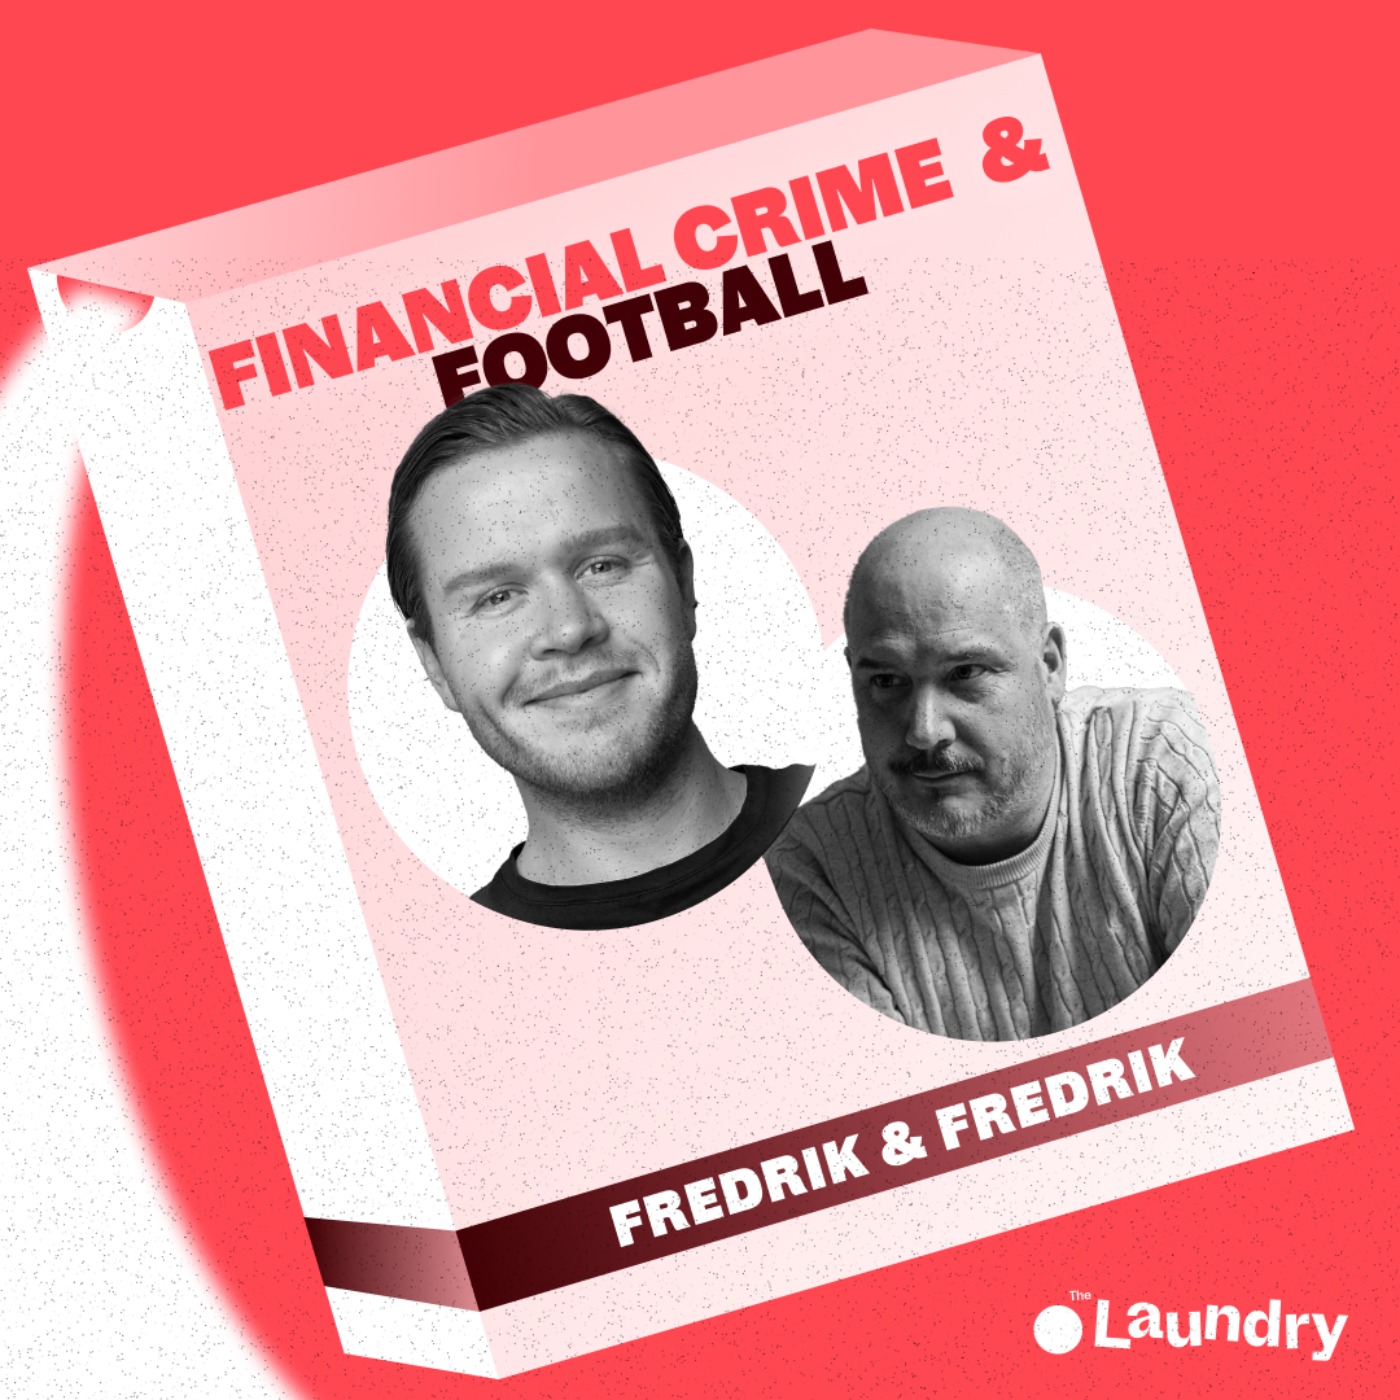 E83: Financial crime in the football industry